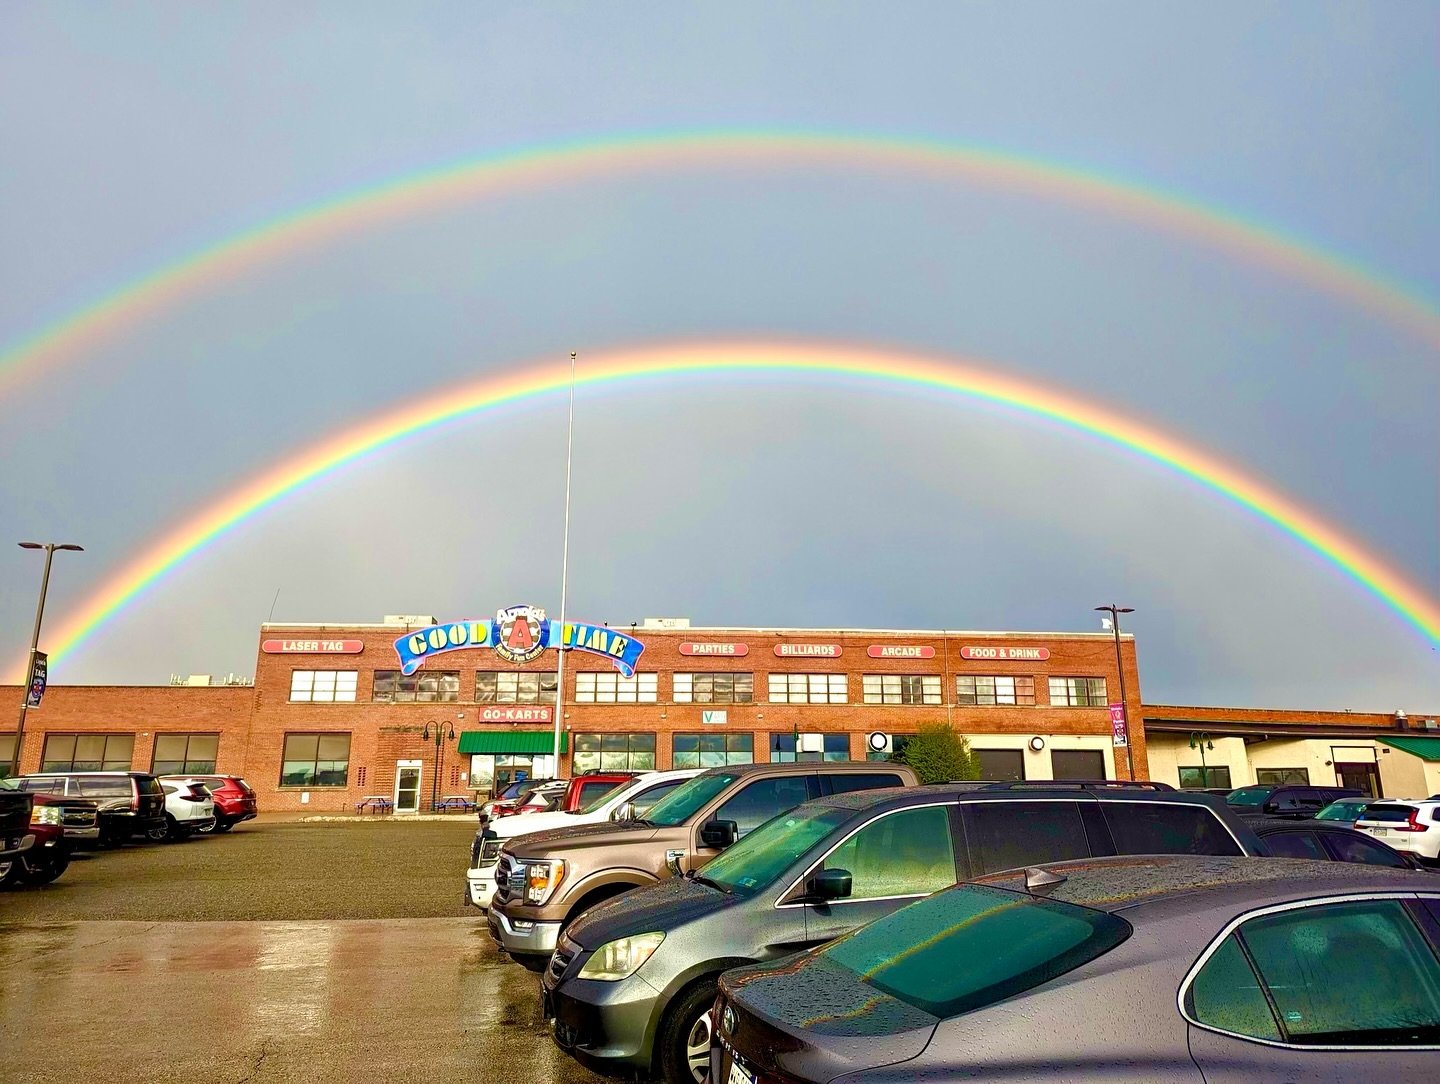 ☀️Happy Friday!🌈

Look at this beautiful DOUBLE RAINBOW that Corey, one of our awesome guest, had captured! Submit your awesome photos to info@arnoldsffc.com or simply just tag us!

#woah #doublerainbow #sun #nature #incredible #makeitmontco